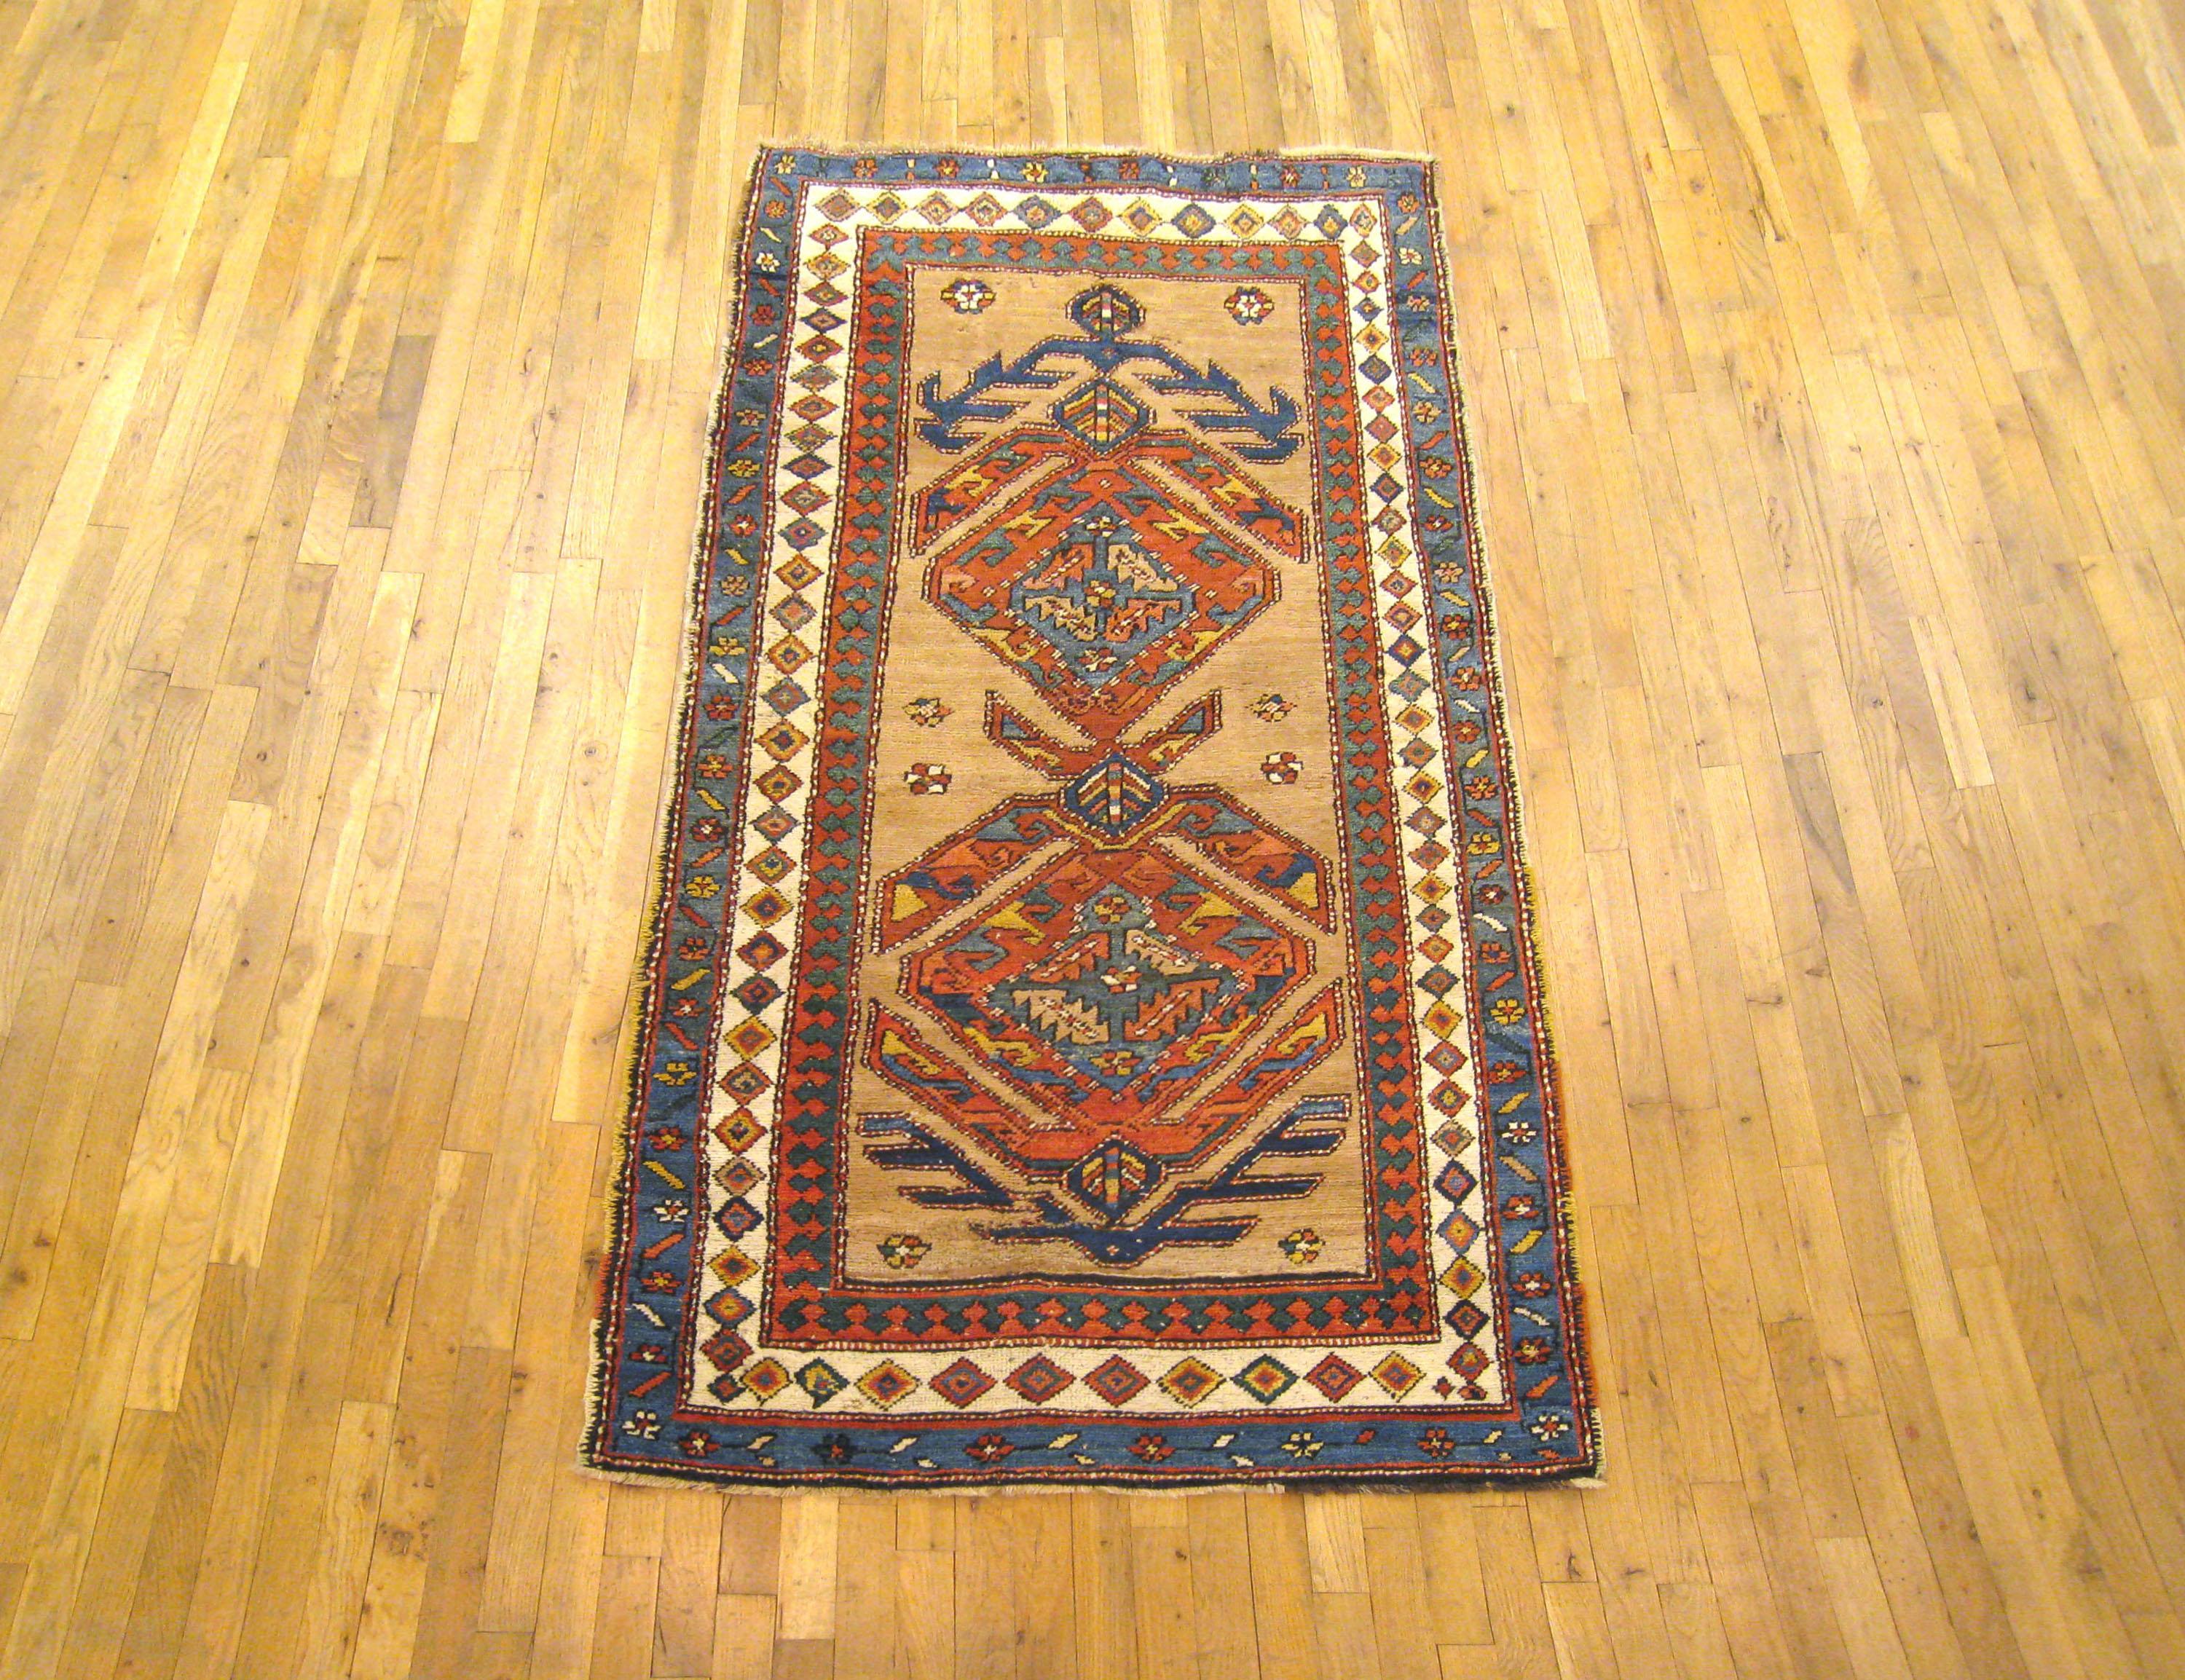 An antique Persian camel hair Serab oriental rug, size 7'4 x 3'6, circa 1900. The rug is characterized by two interconnected geometric medallions on a camel colored field, enclosed within a series of guard borders with diamonds and other geometric